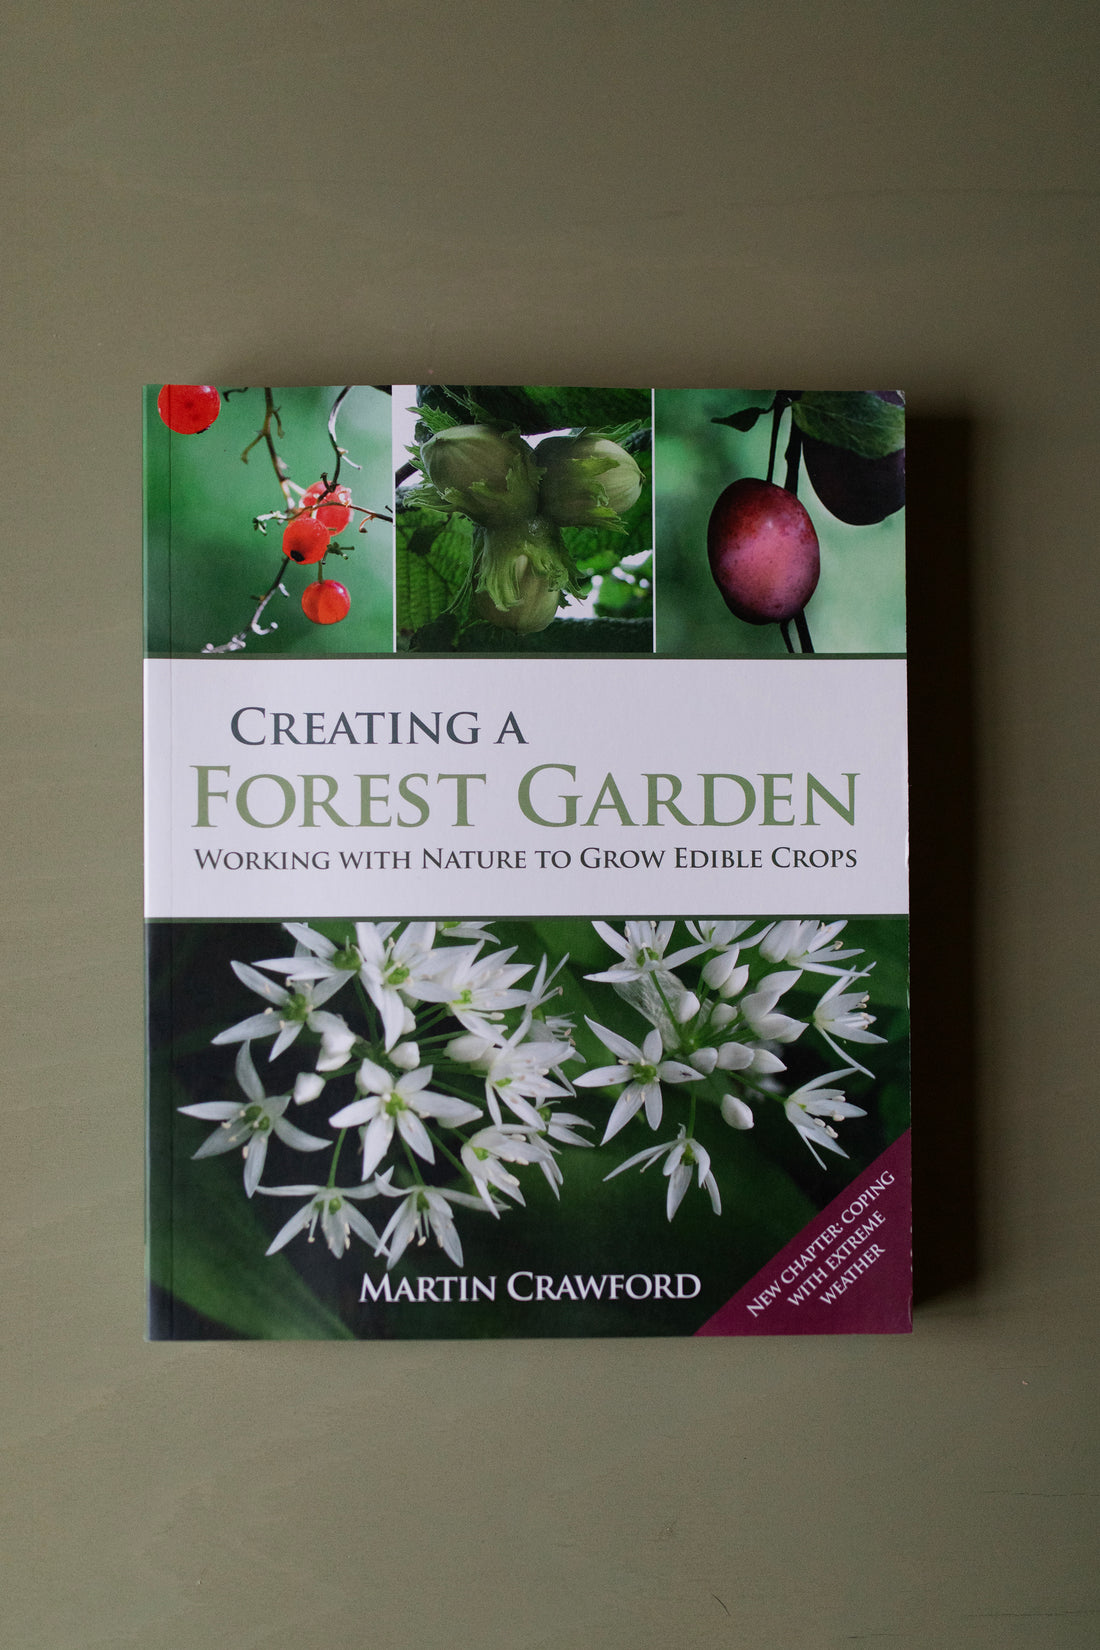 Creating a Forest Garden - Working with Nature to Grow Edible Crops